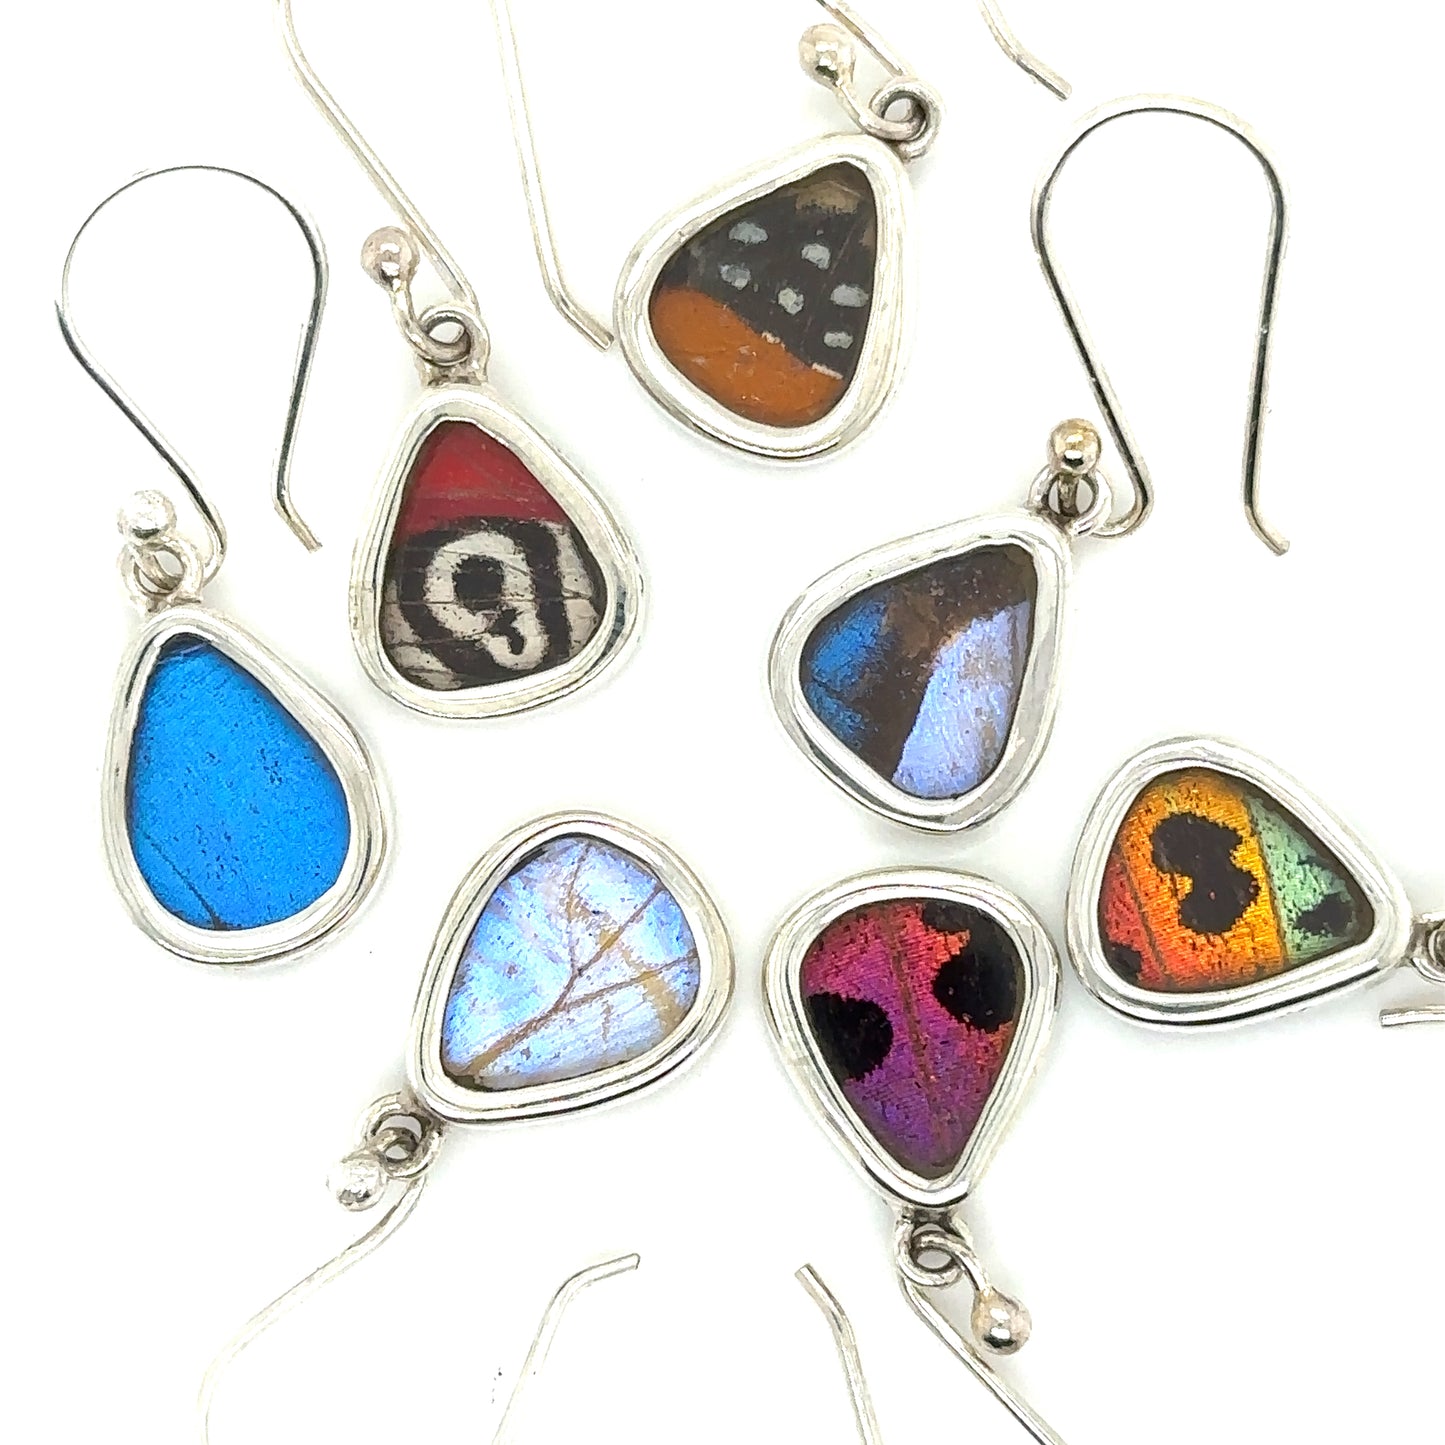 A group of colorful Small Wide Teardrop Butterfly Wing Earrings on a white background.